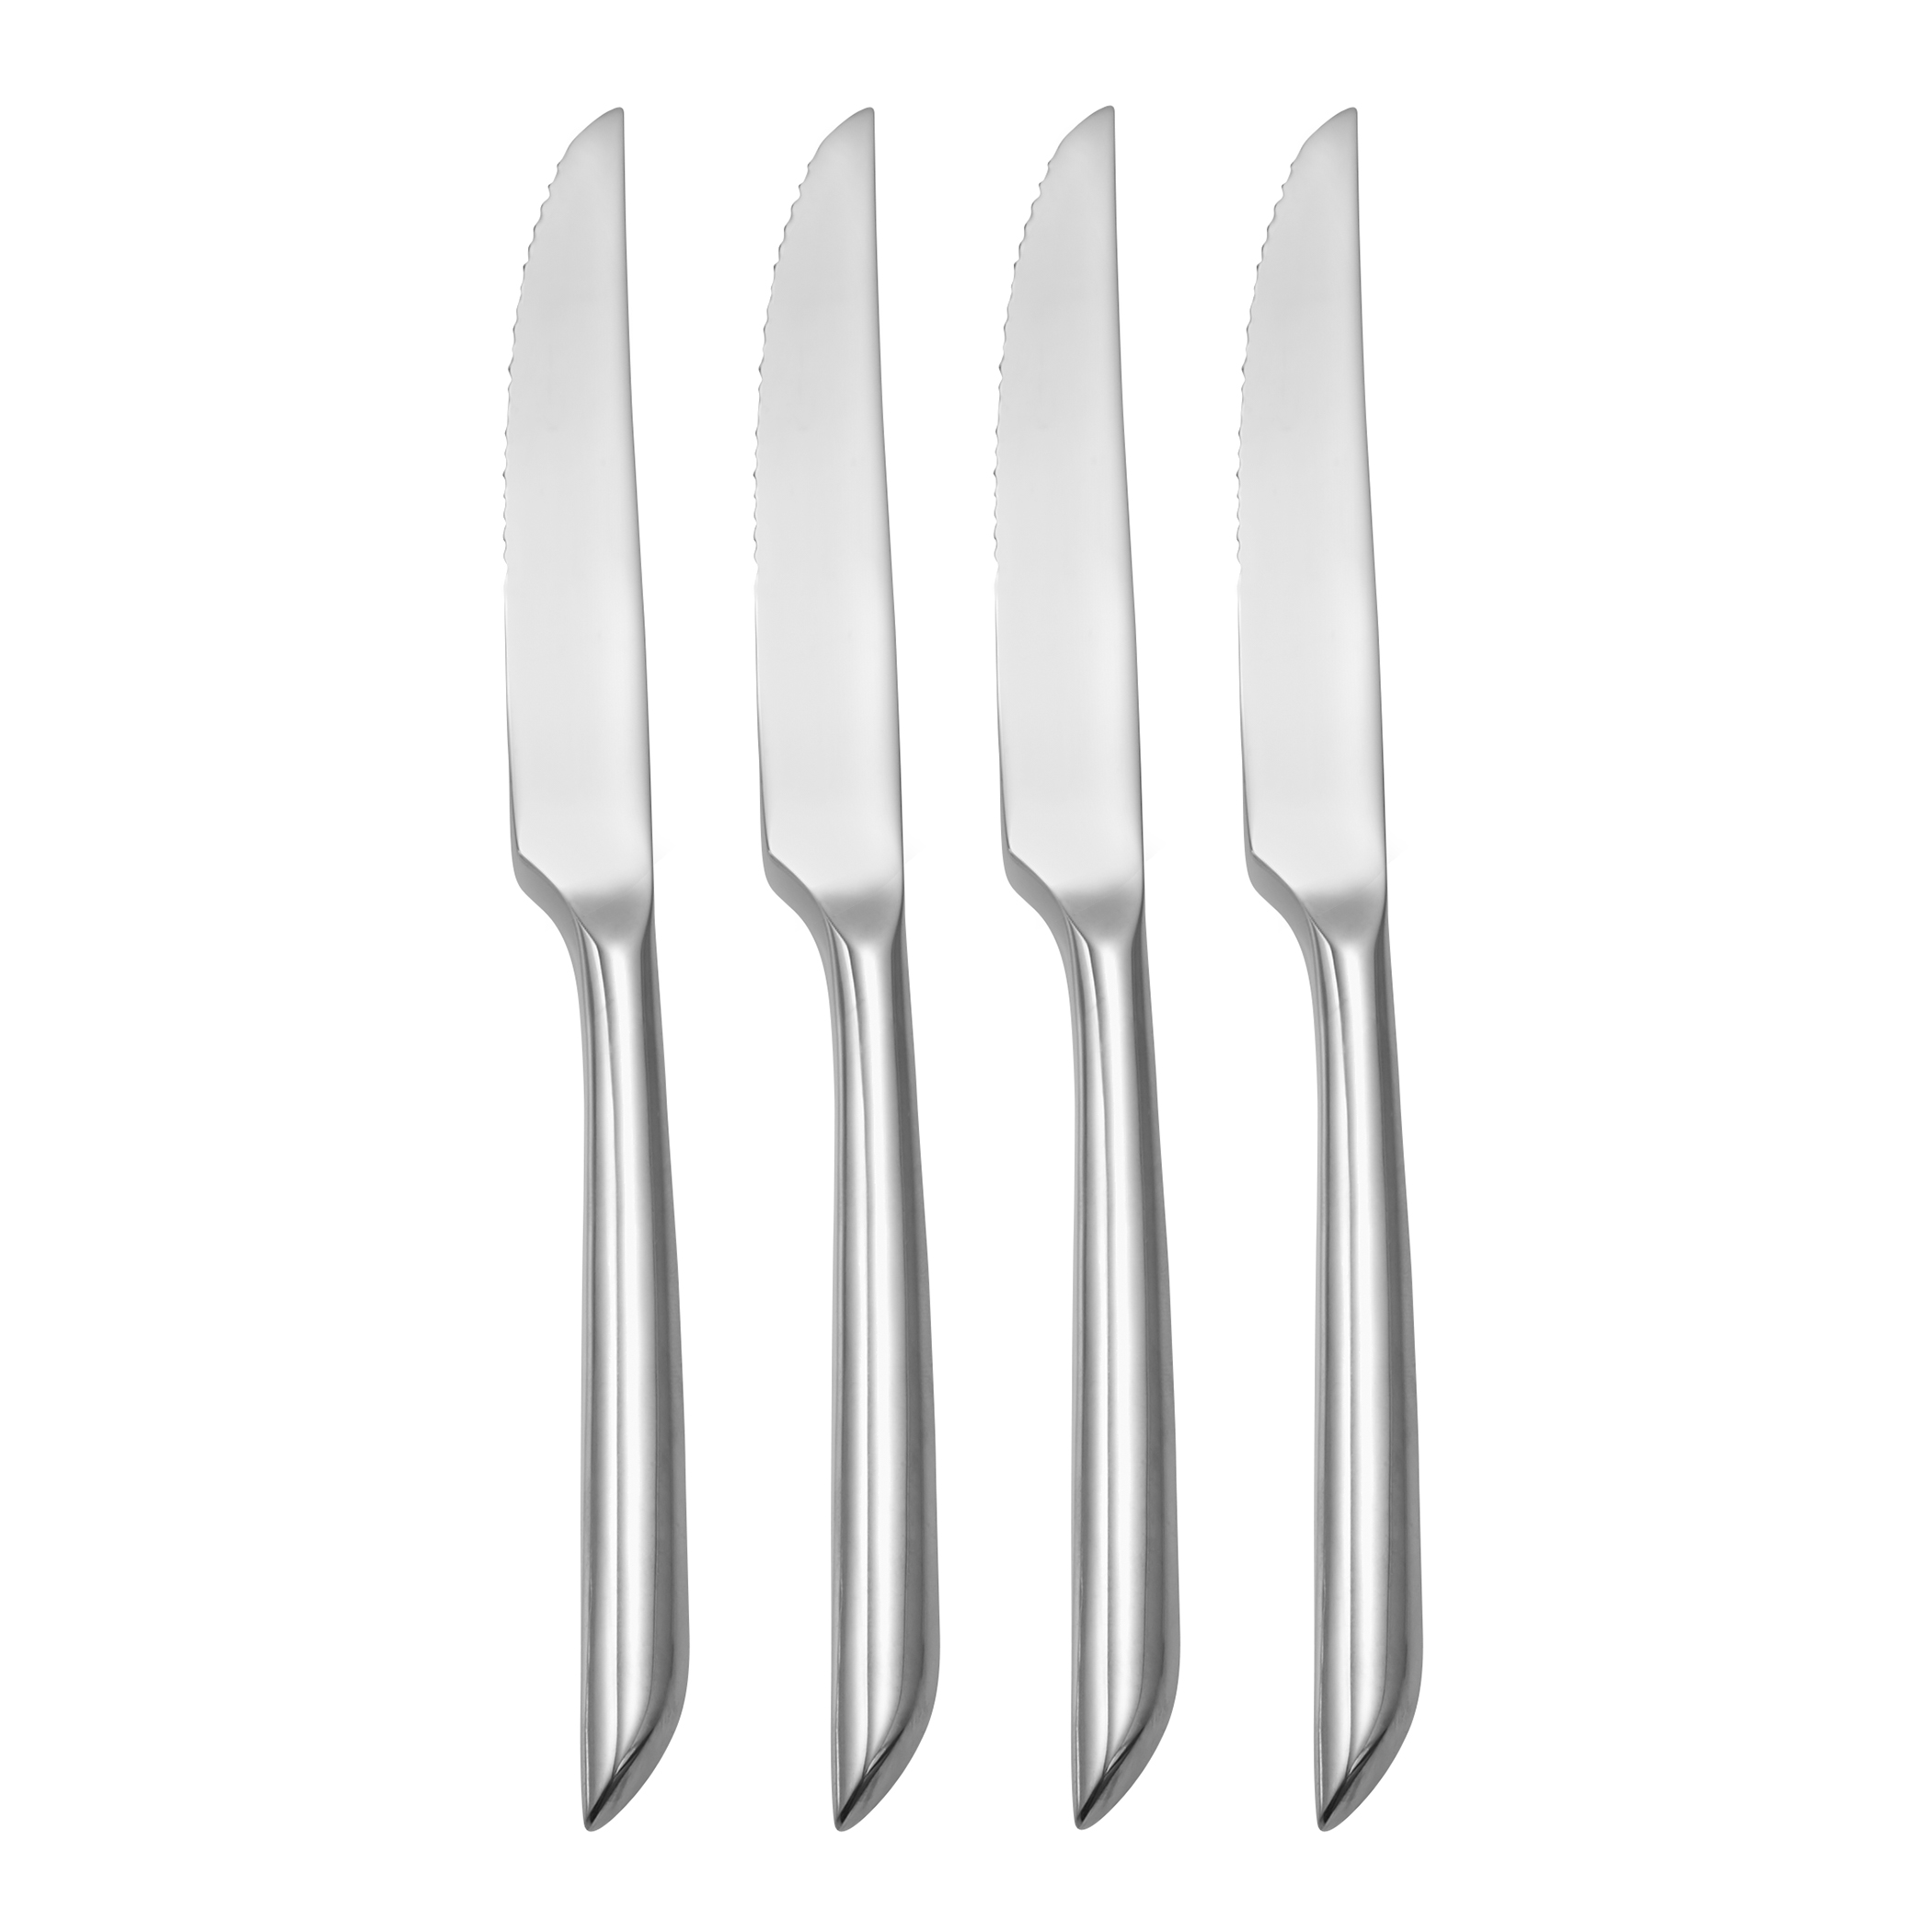 https://nambe.com/on/demandware.static/-/Sites-master/default/dwf75fab90/products/large/MT1205_Frond_Steak_Knives_Set%20of%204.jpg